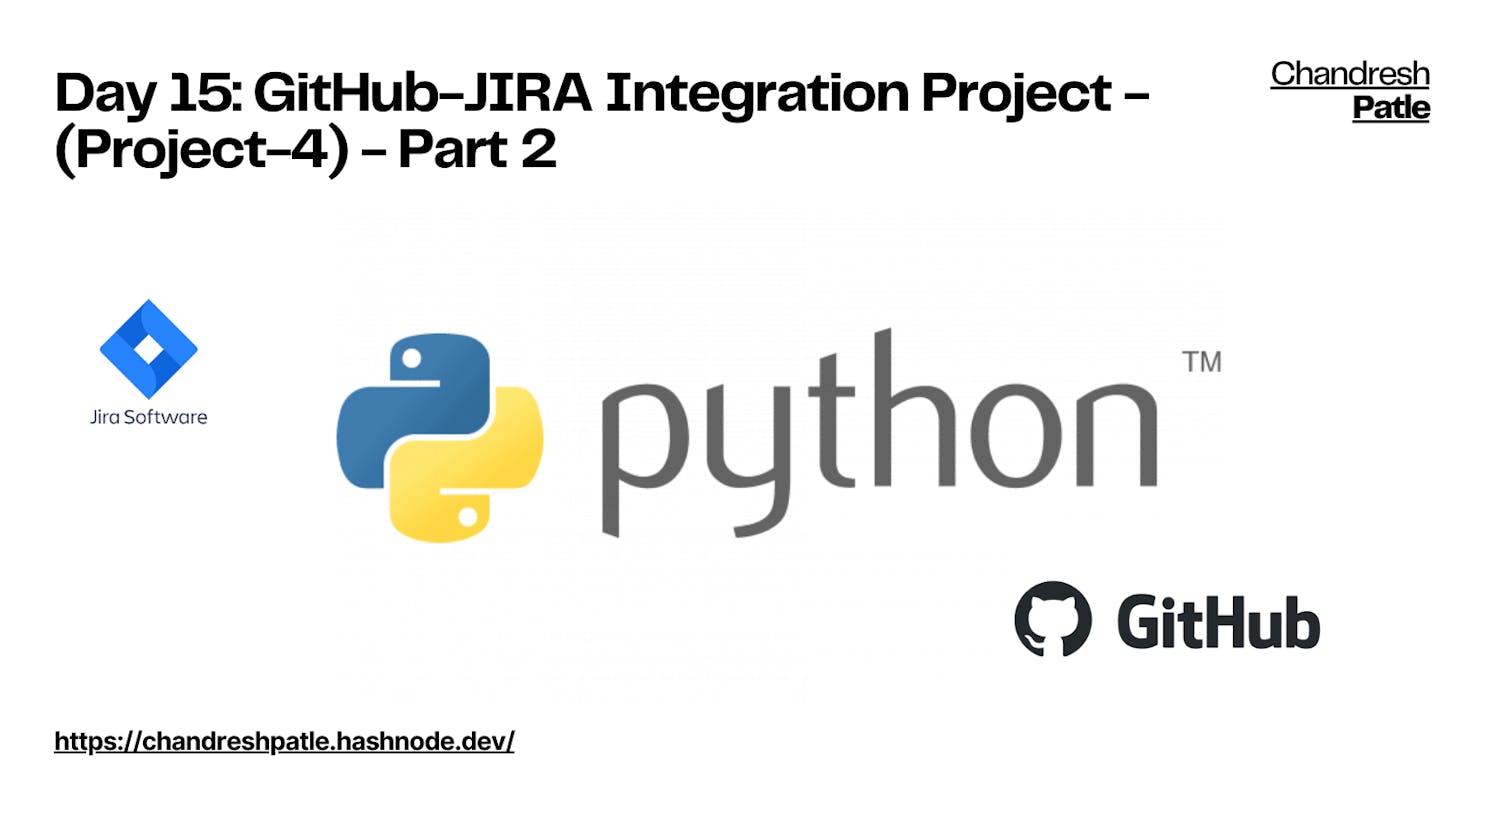 Day 15: GitHub-JIRA Integration Project - (Project-4) - (Part 2)